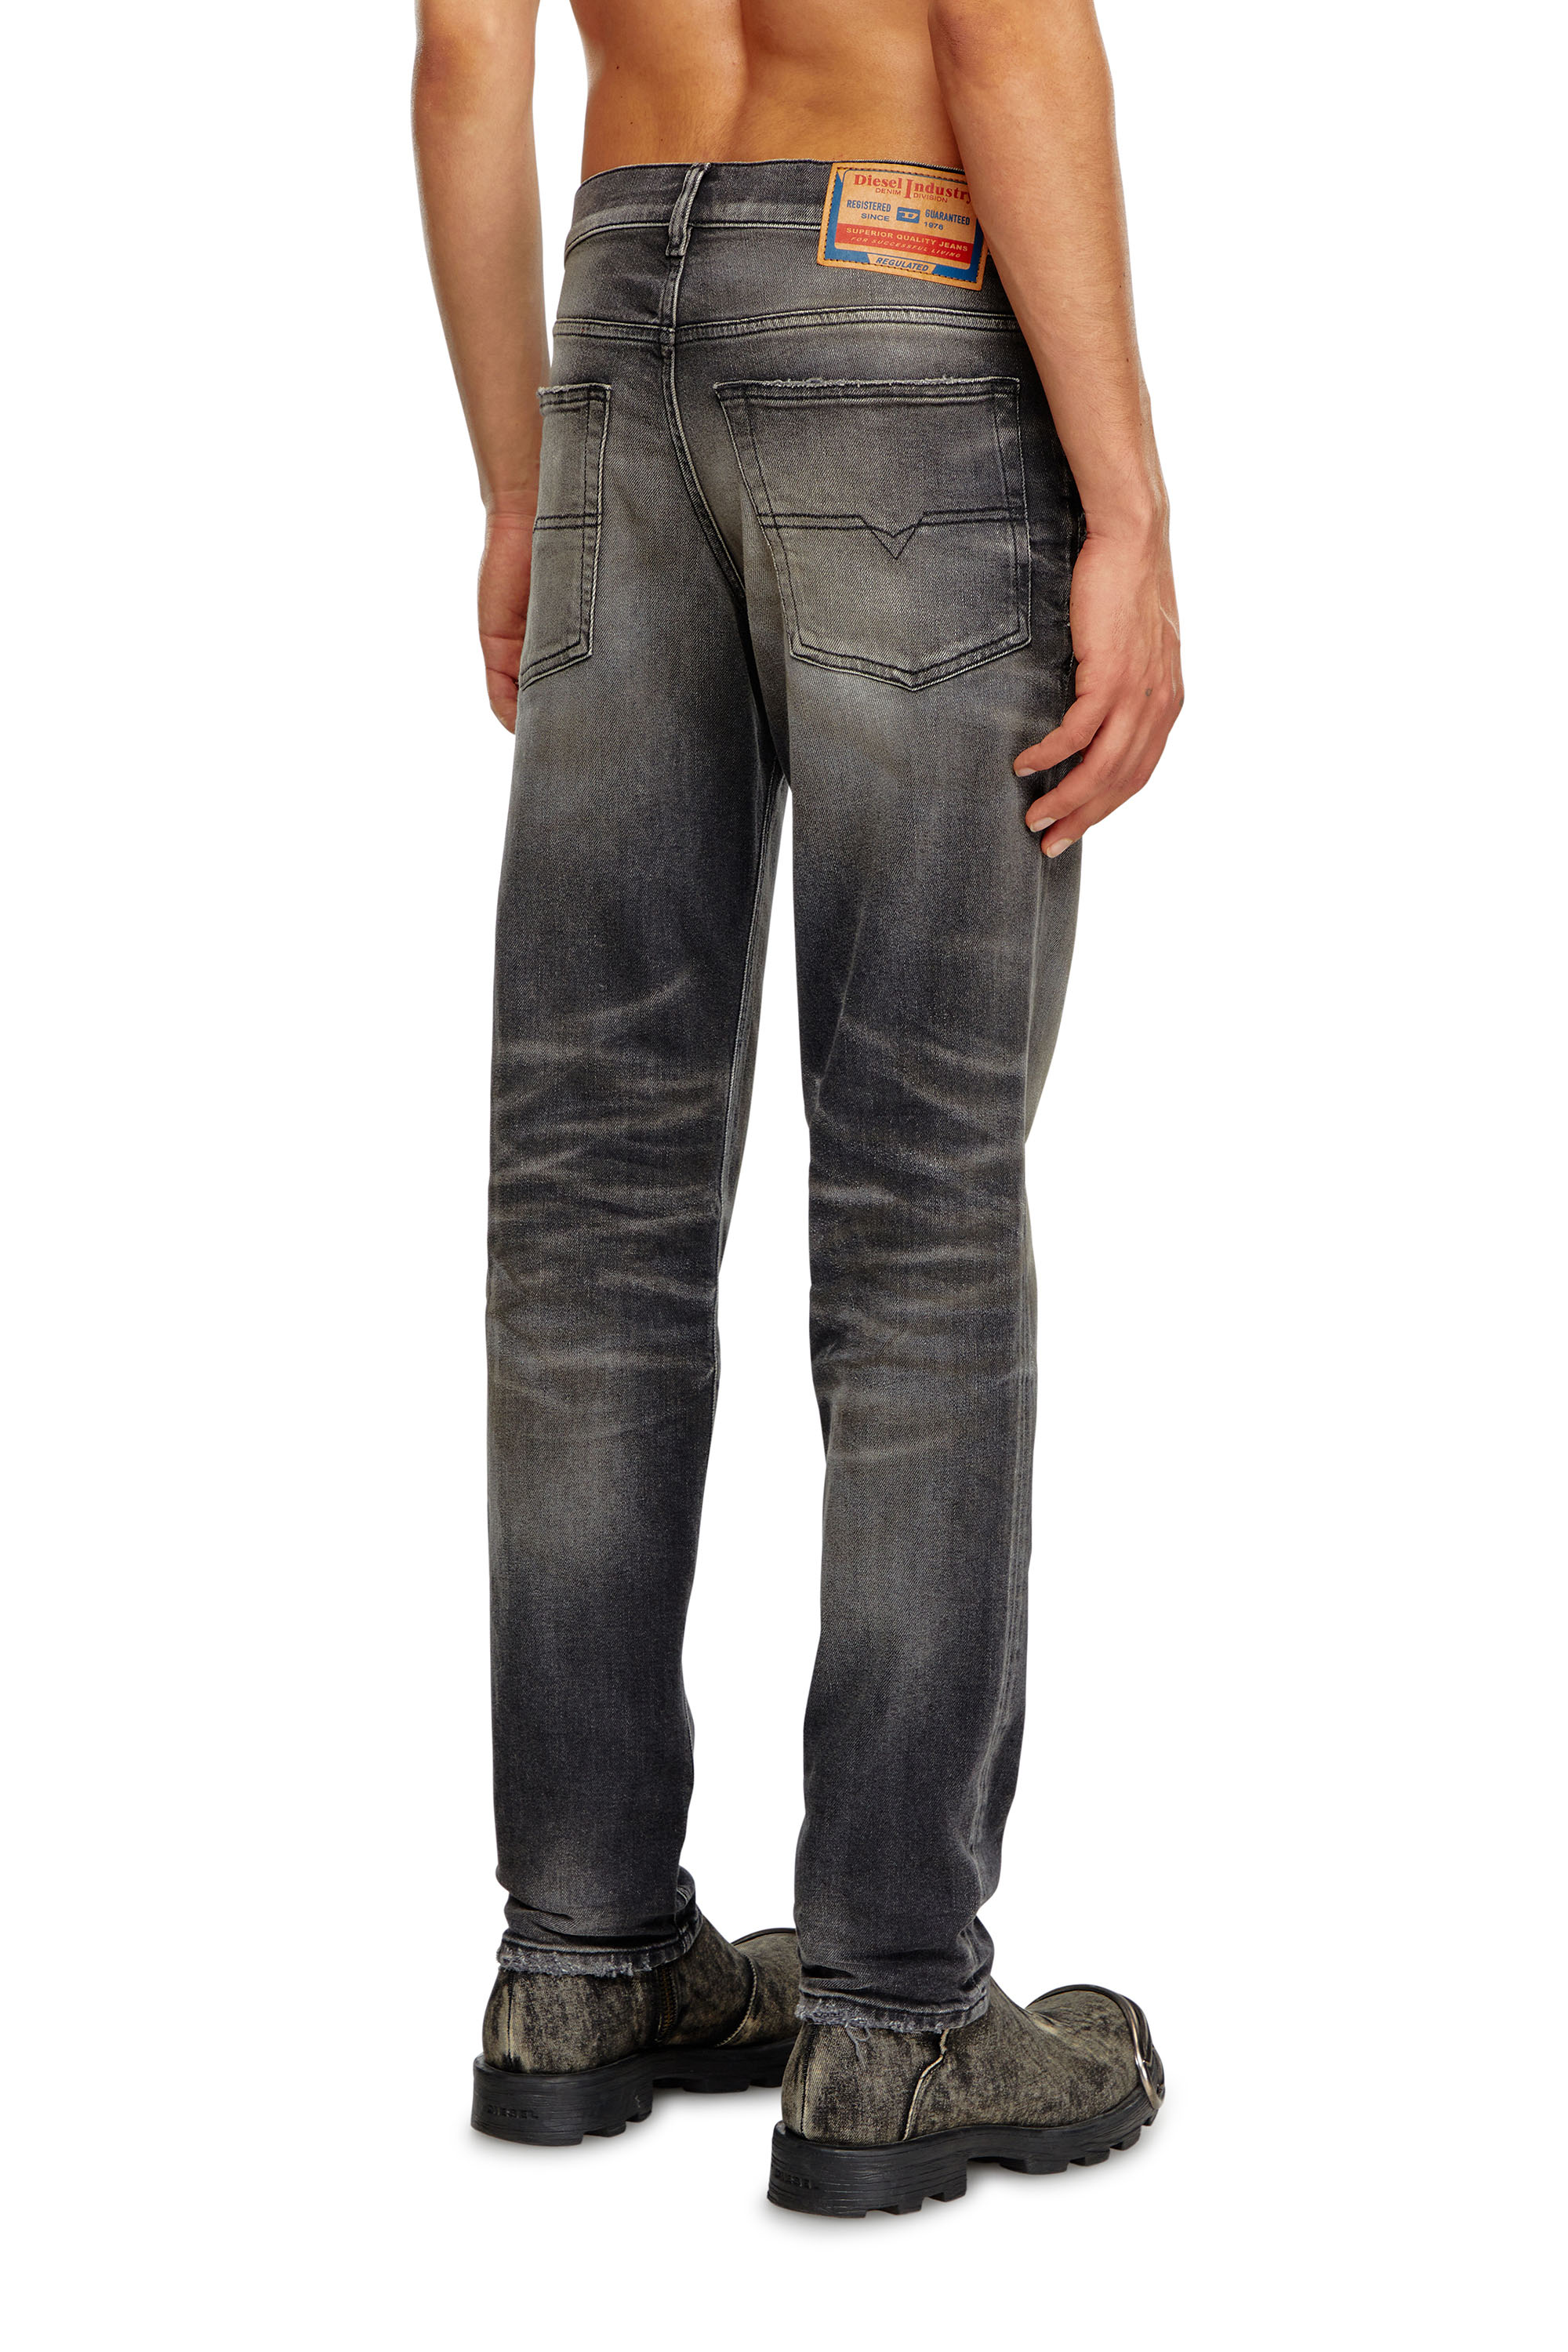 Diesel - Tapered Jeans 2023 D-Finitive 09K25, Hombre Tapered Jeans - 2023 D-Finitive in Negro - Image 4